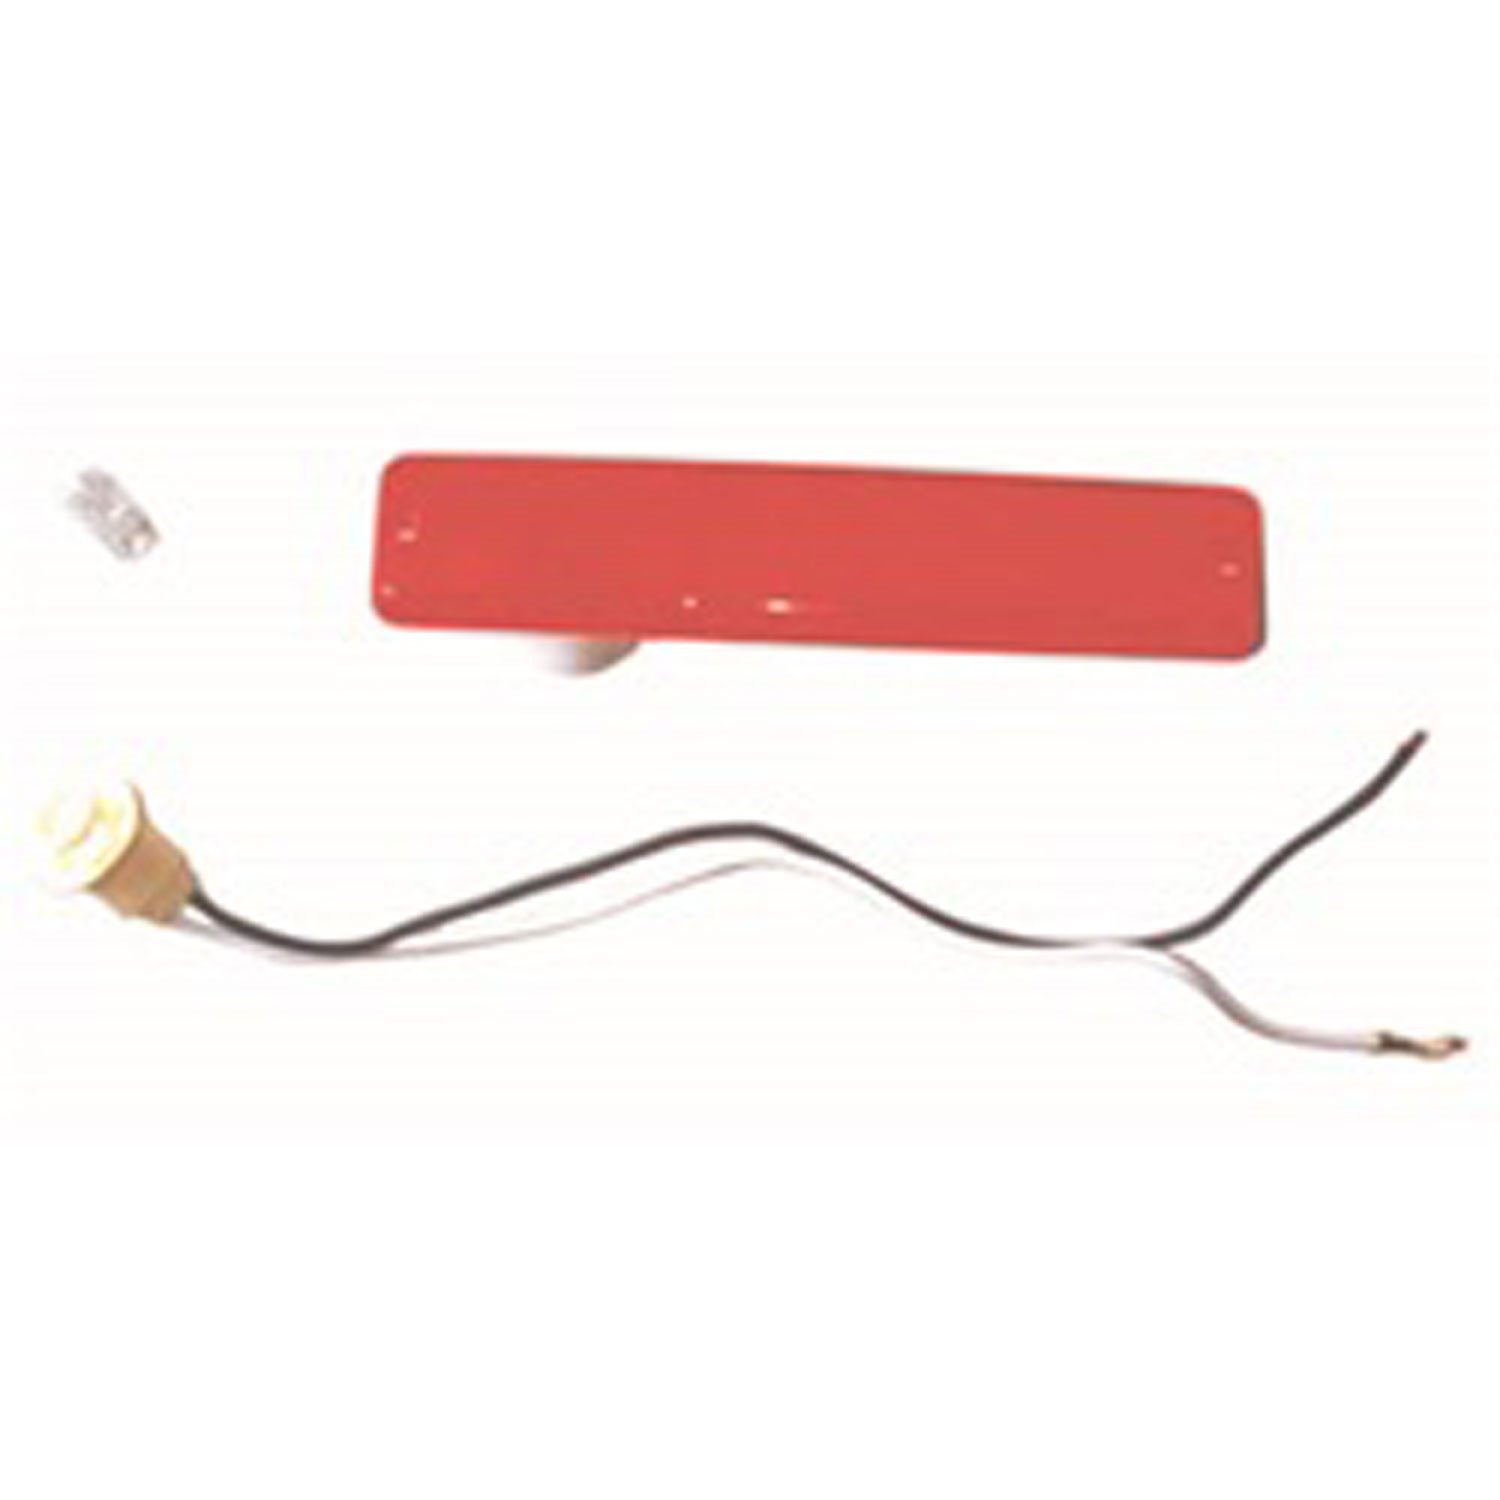 This red side marker assembly from Omix-ADA fits the left or right sides on the rear of 72-86 Jeep C